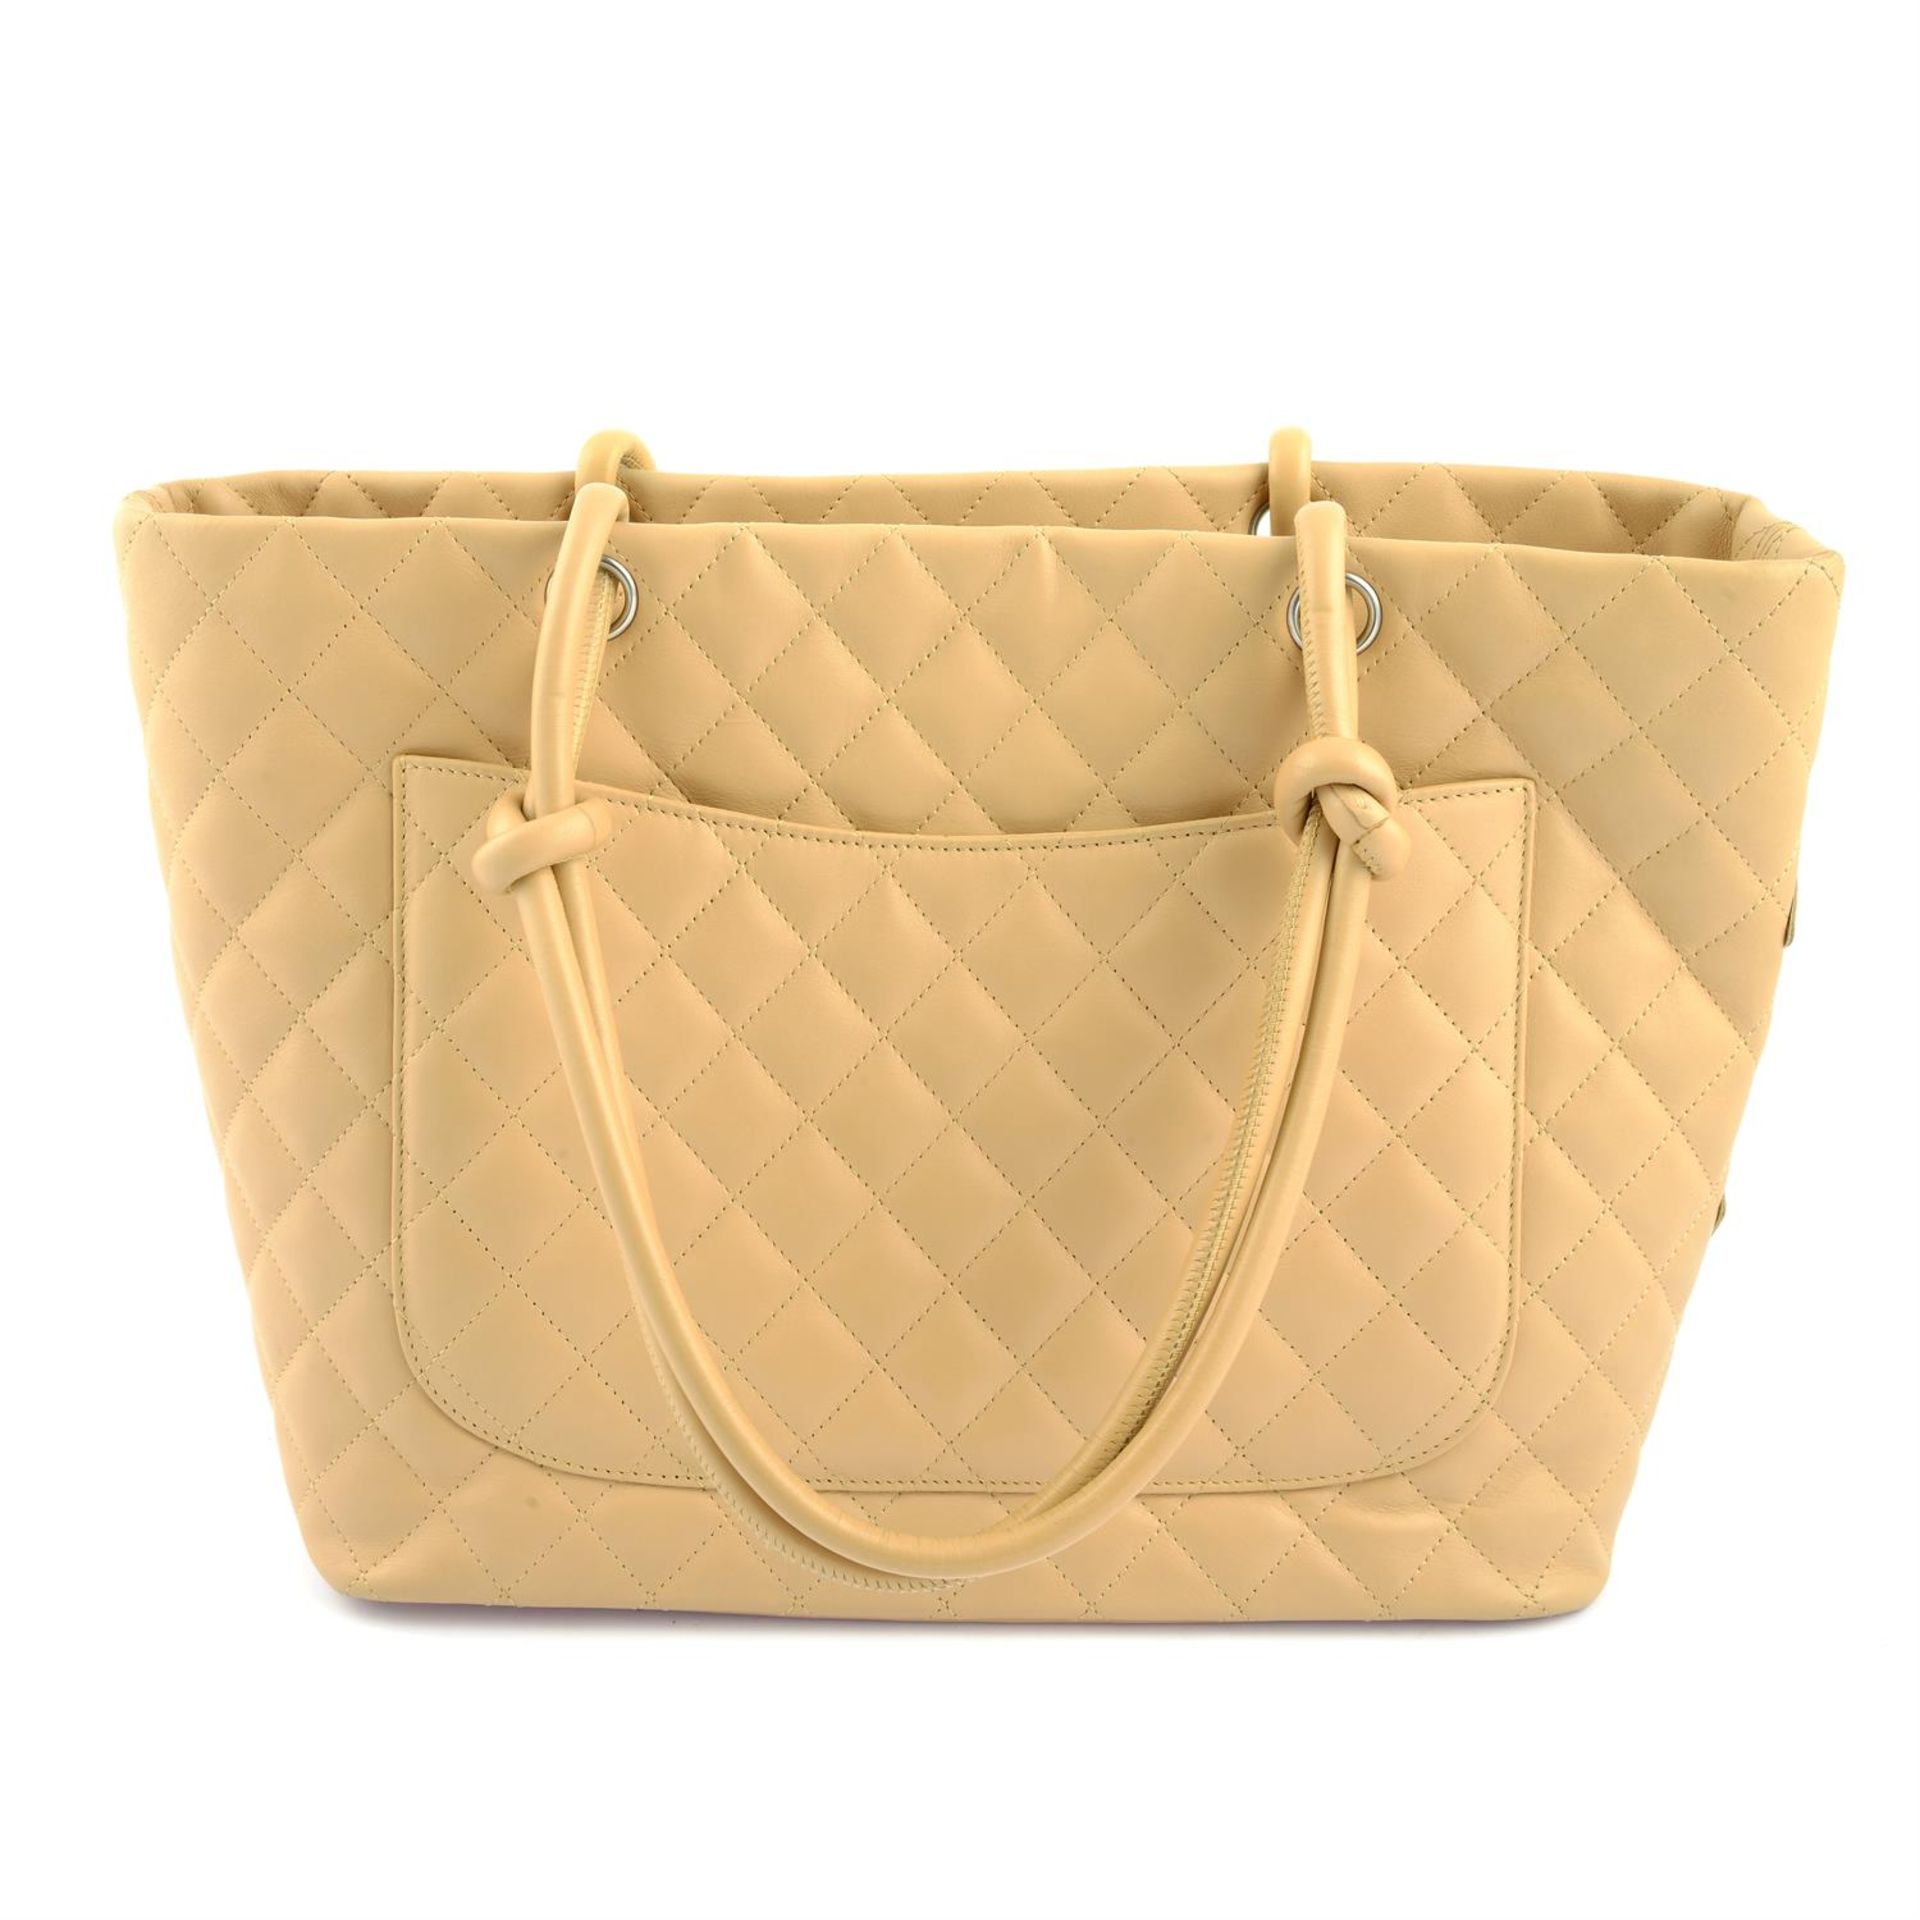 CHANEL - a beige CC Cambon leather tote bag. - Image 2 of 5